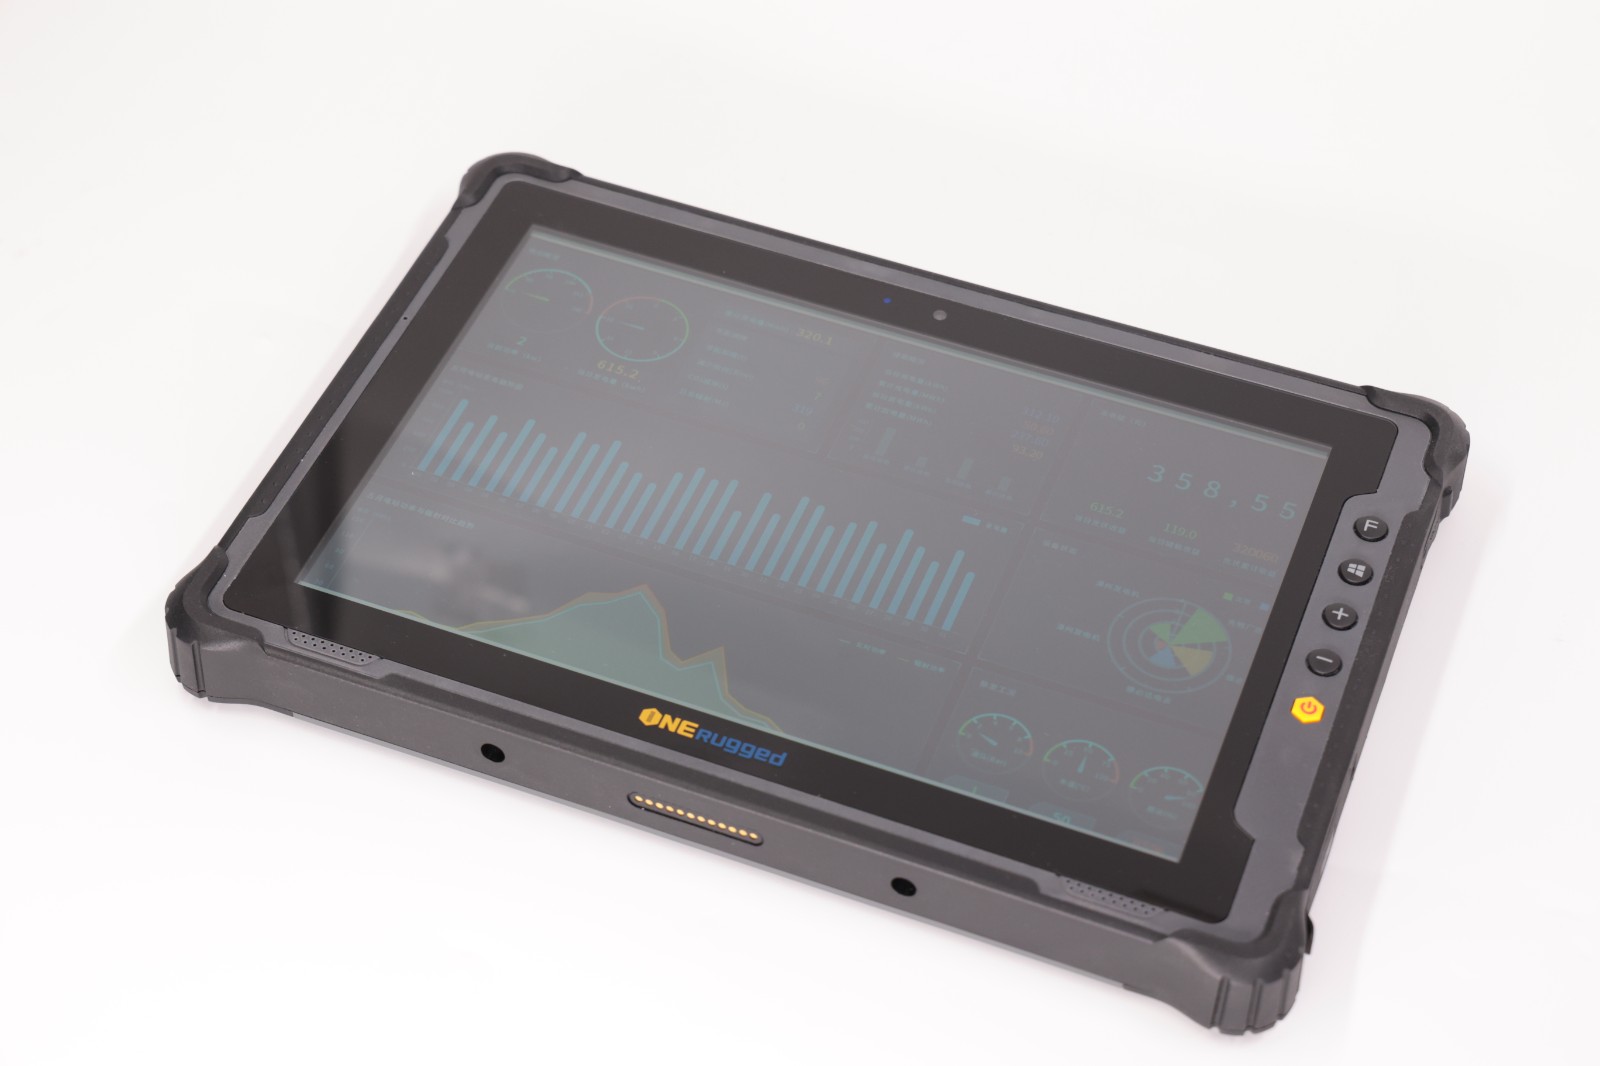 rugged tablet